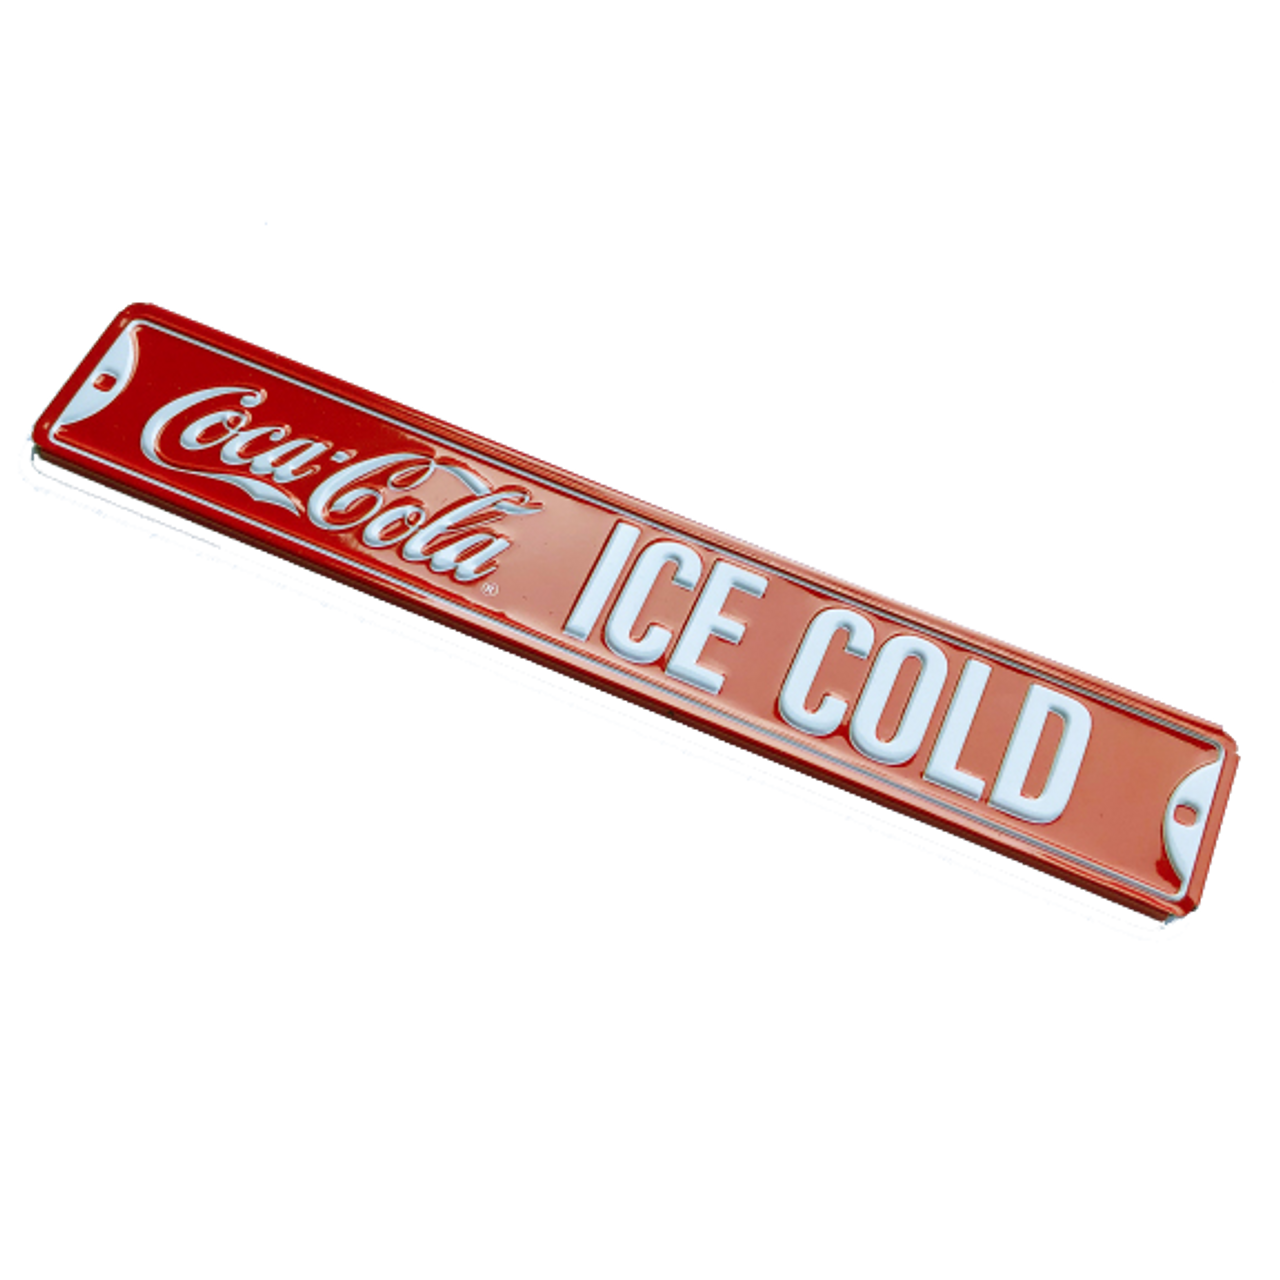 COKE ICE COLD STREET MAGNET -  Ande Rooney